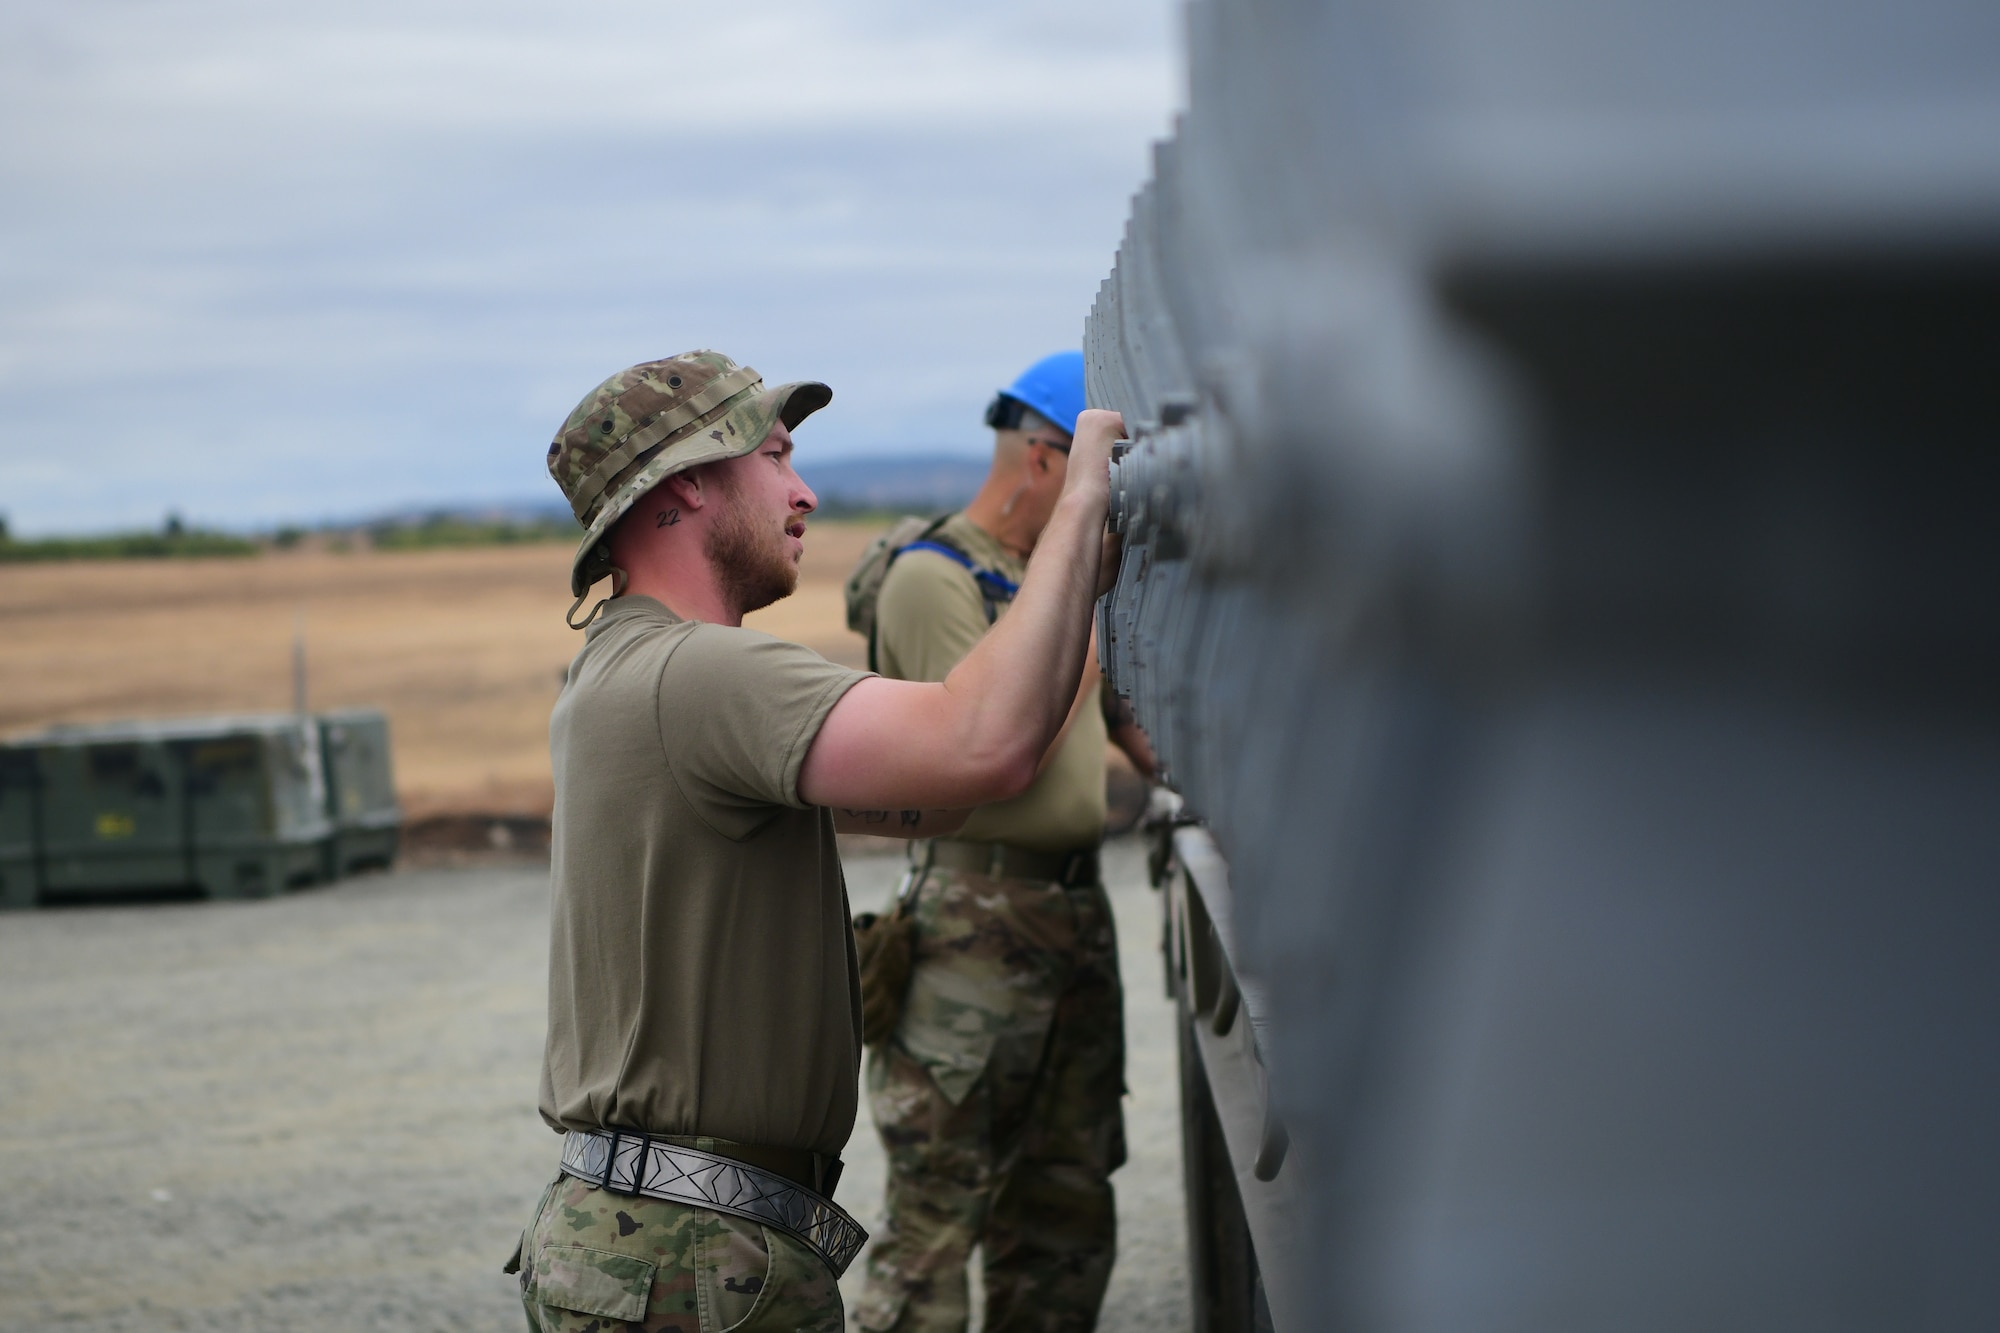 A 9th Munitions Squadron Airman inspects munitions loaded on a truck bed on Beale Air Force Base, California on Sept. 25, 2023.